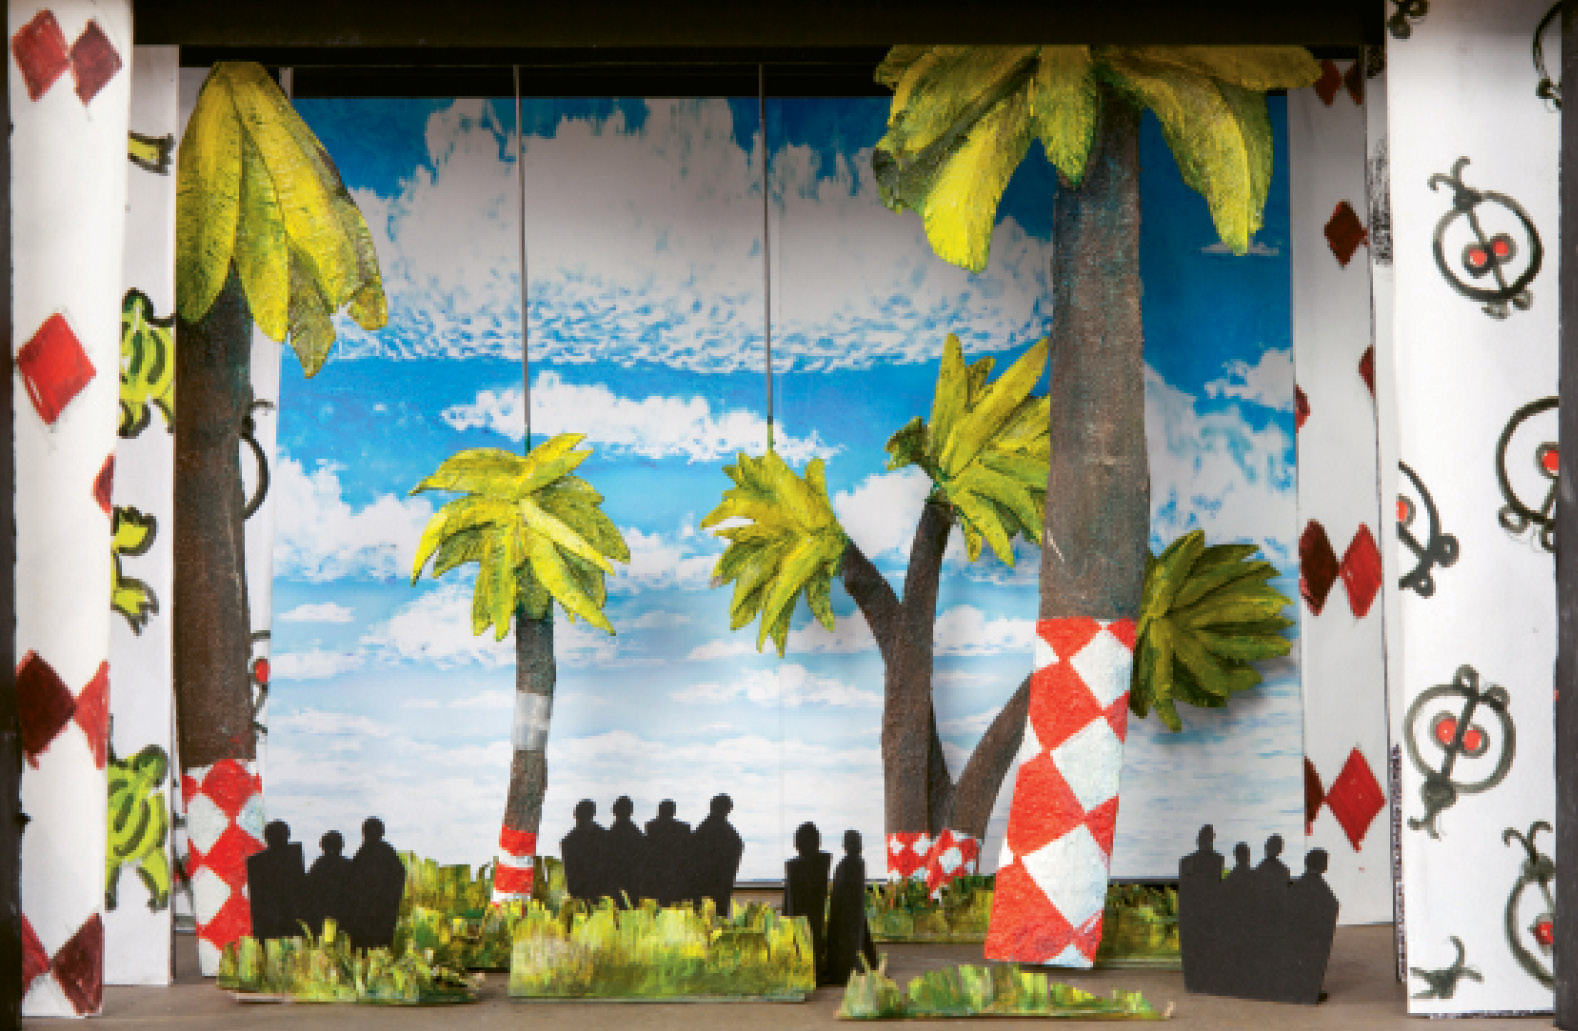 Act Two, Scene Two’s Kittiwah Island continues Green’s vibrant aesthetic